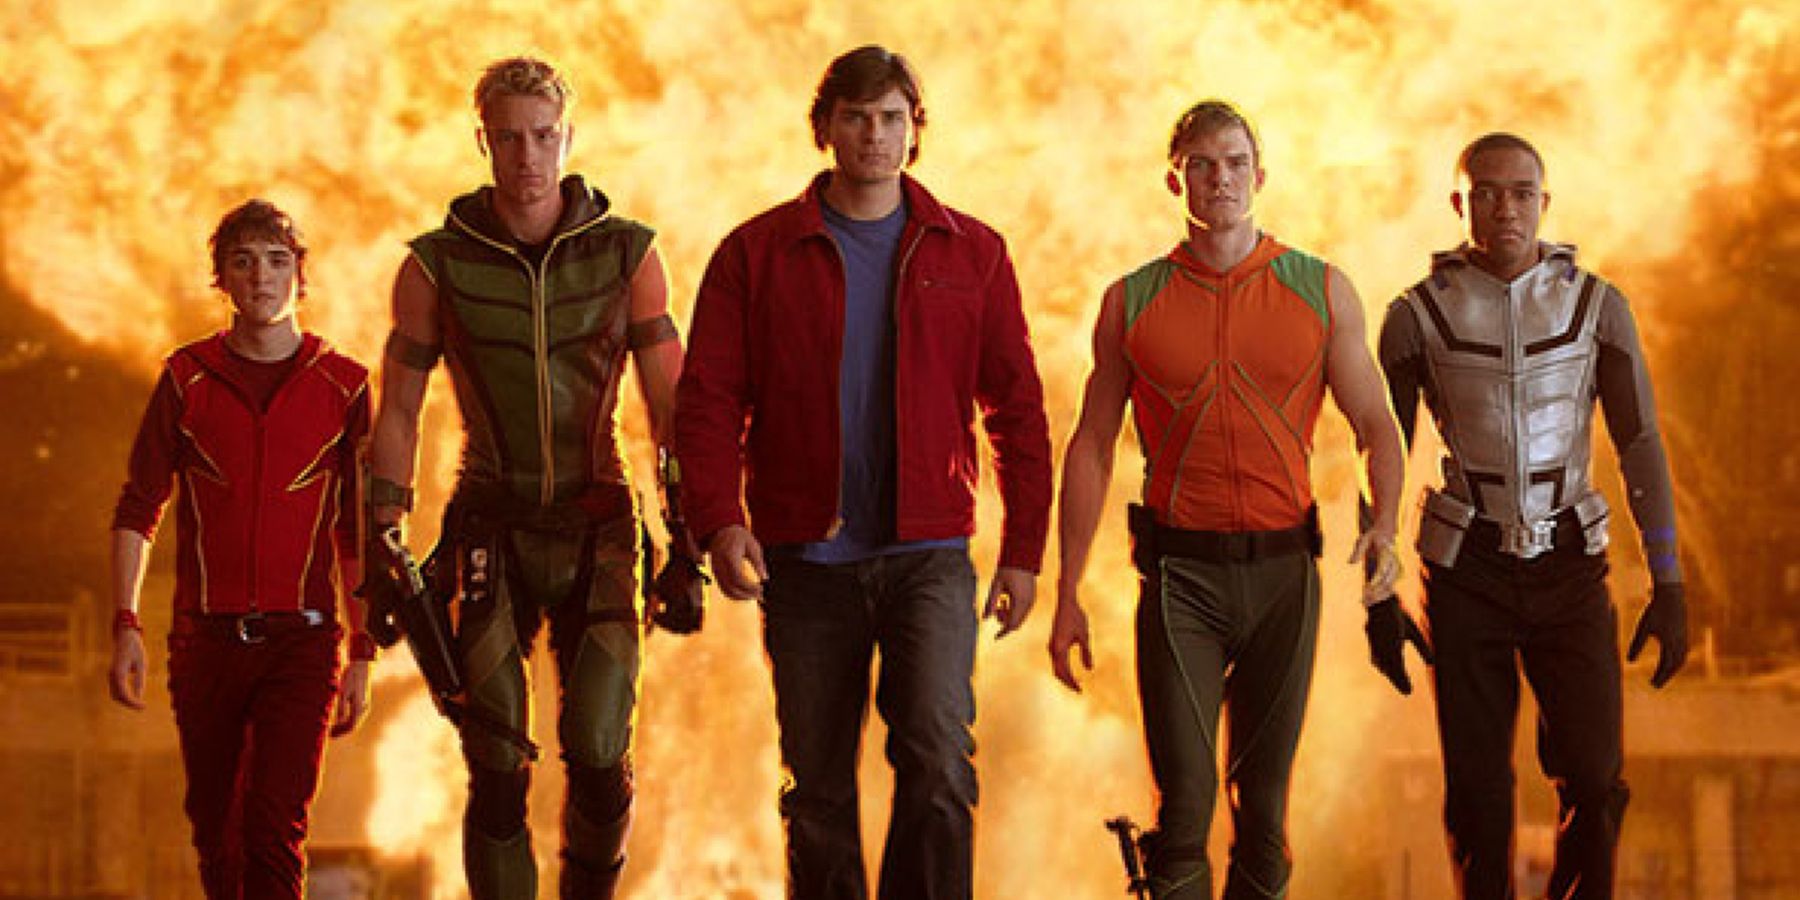 The Justice League from Smallville